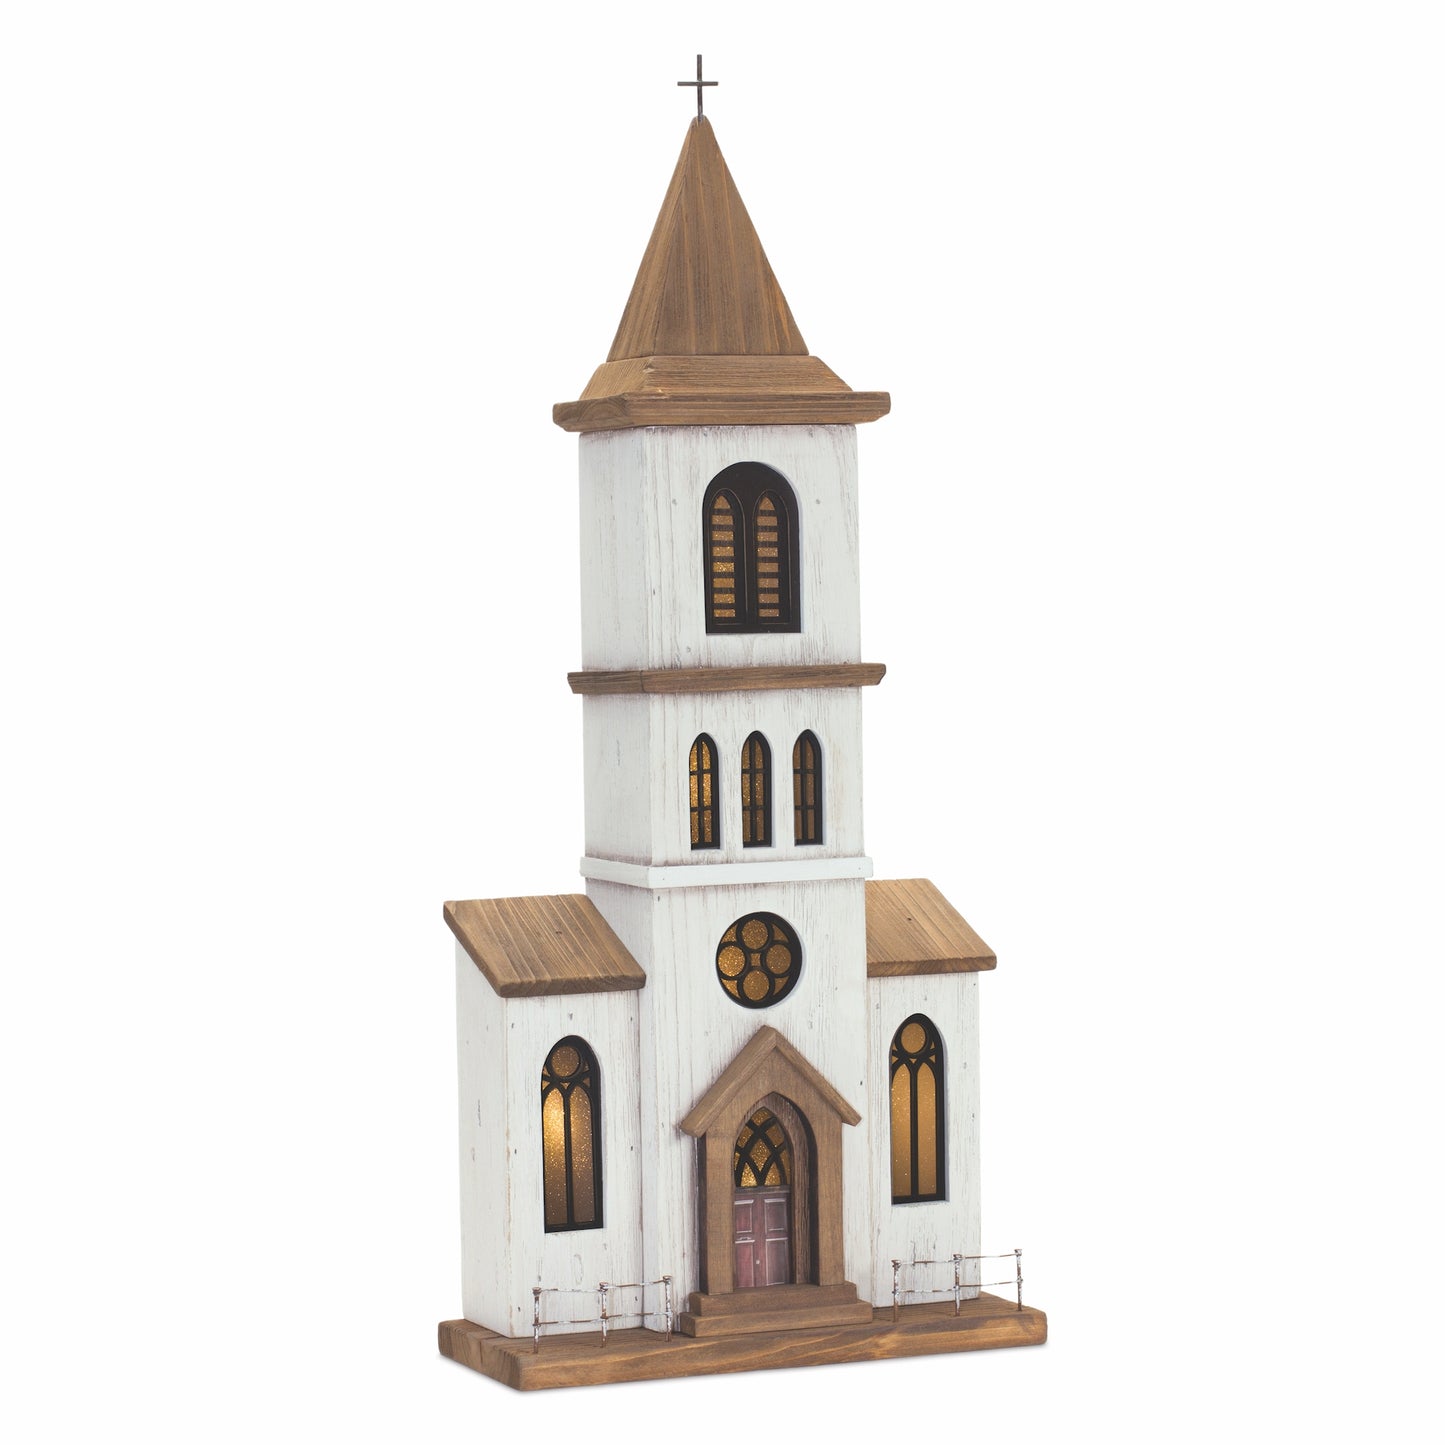 Lighted Natural Wooden Church Display with Rustic Metal Accents 25.25"H